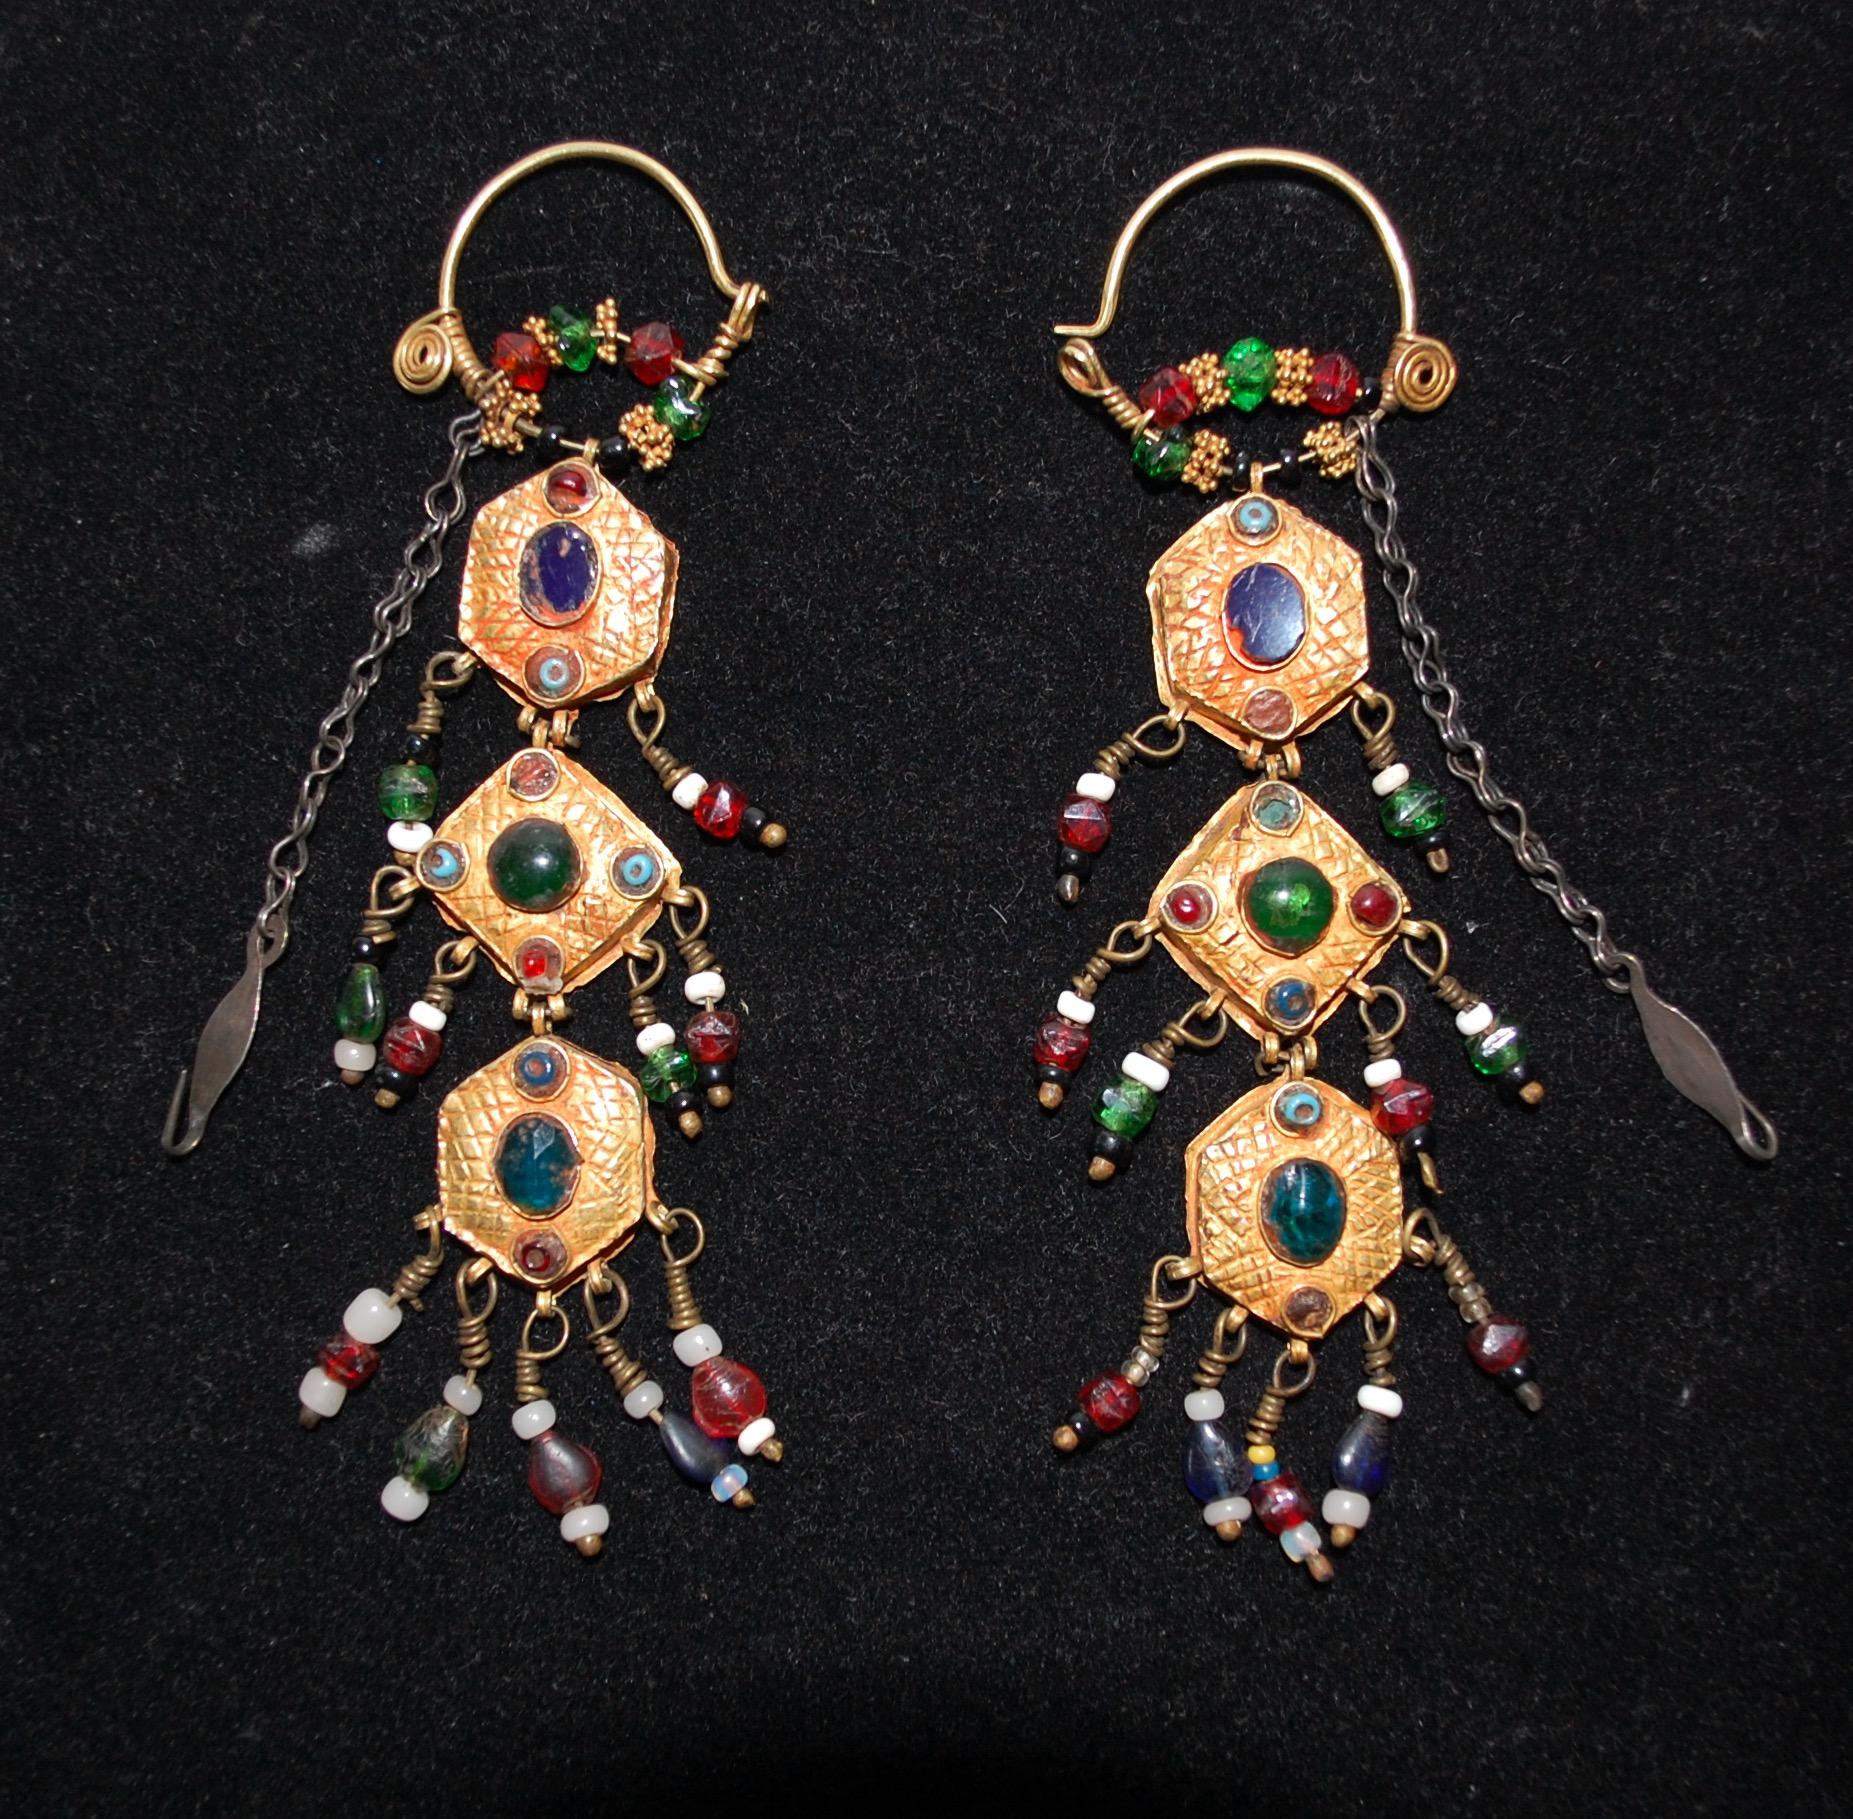 22k Gold Antique Qajar Bridal Earrings In Good Condition For Sale In Lake Worth, FL